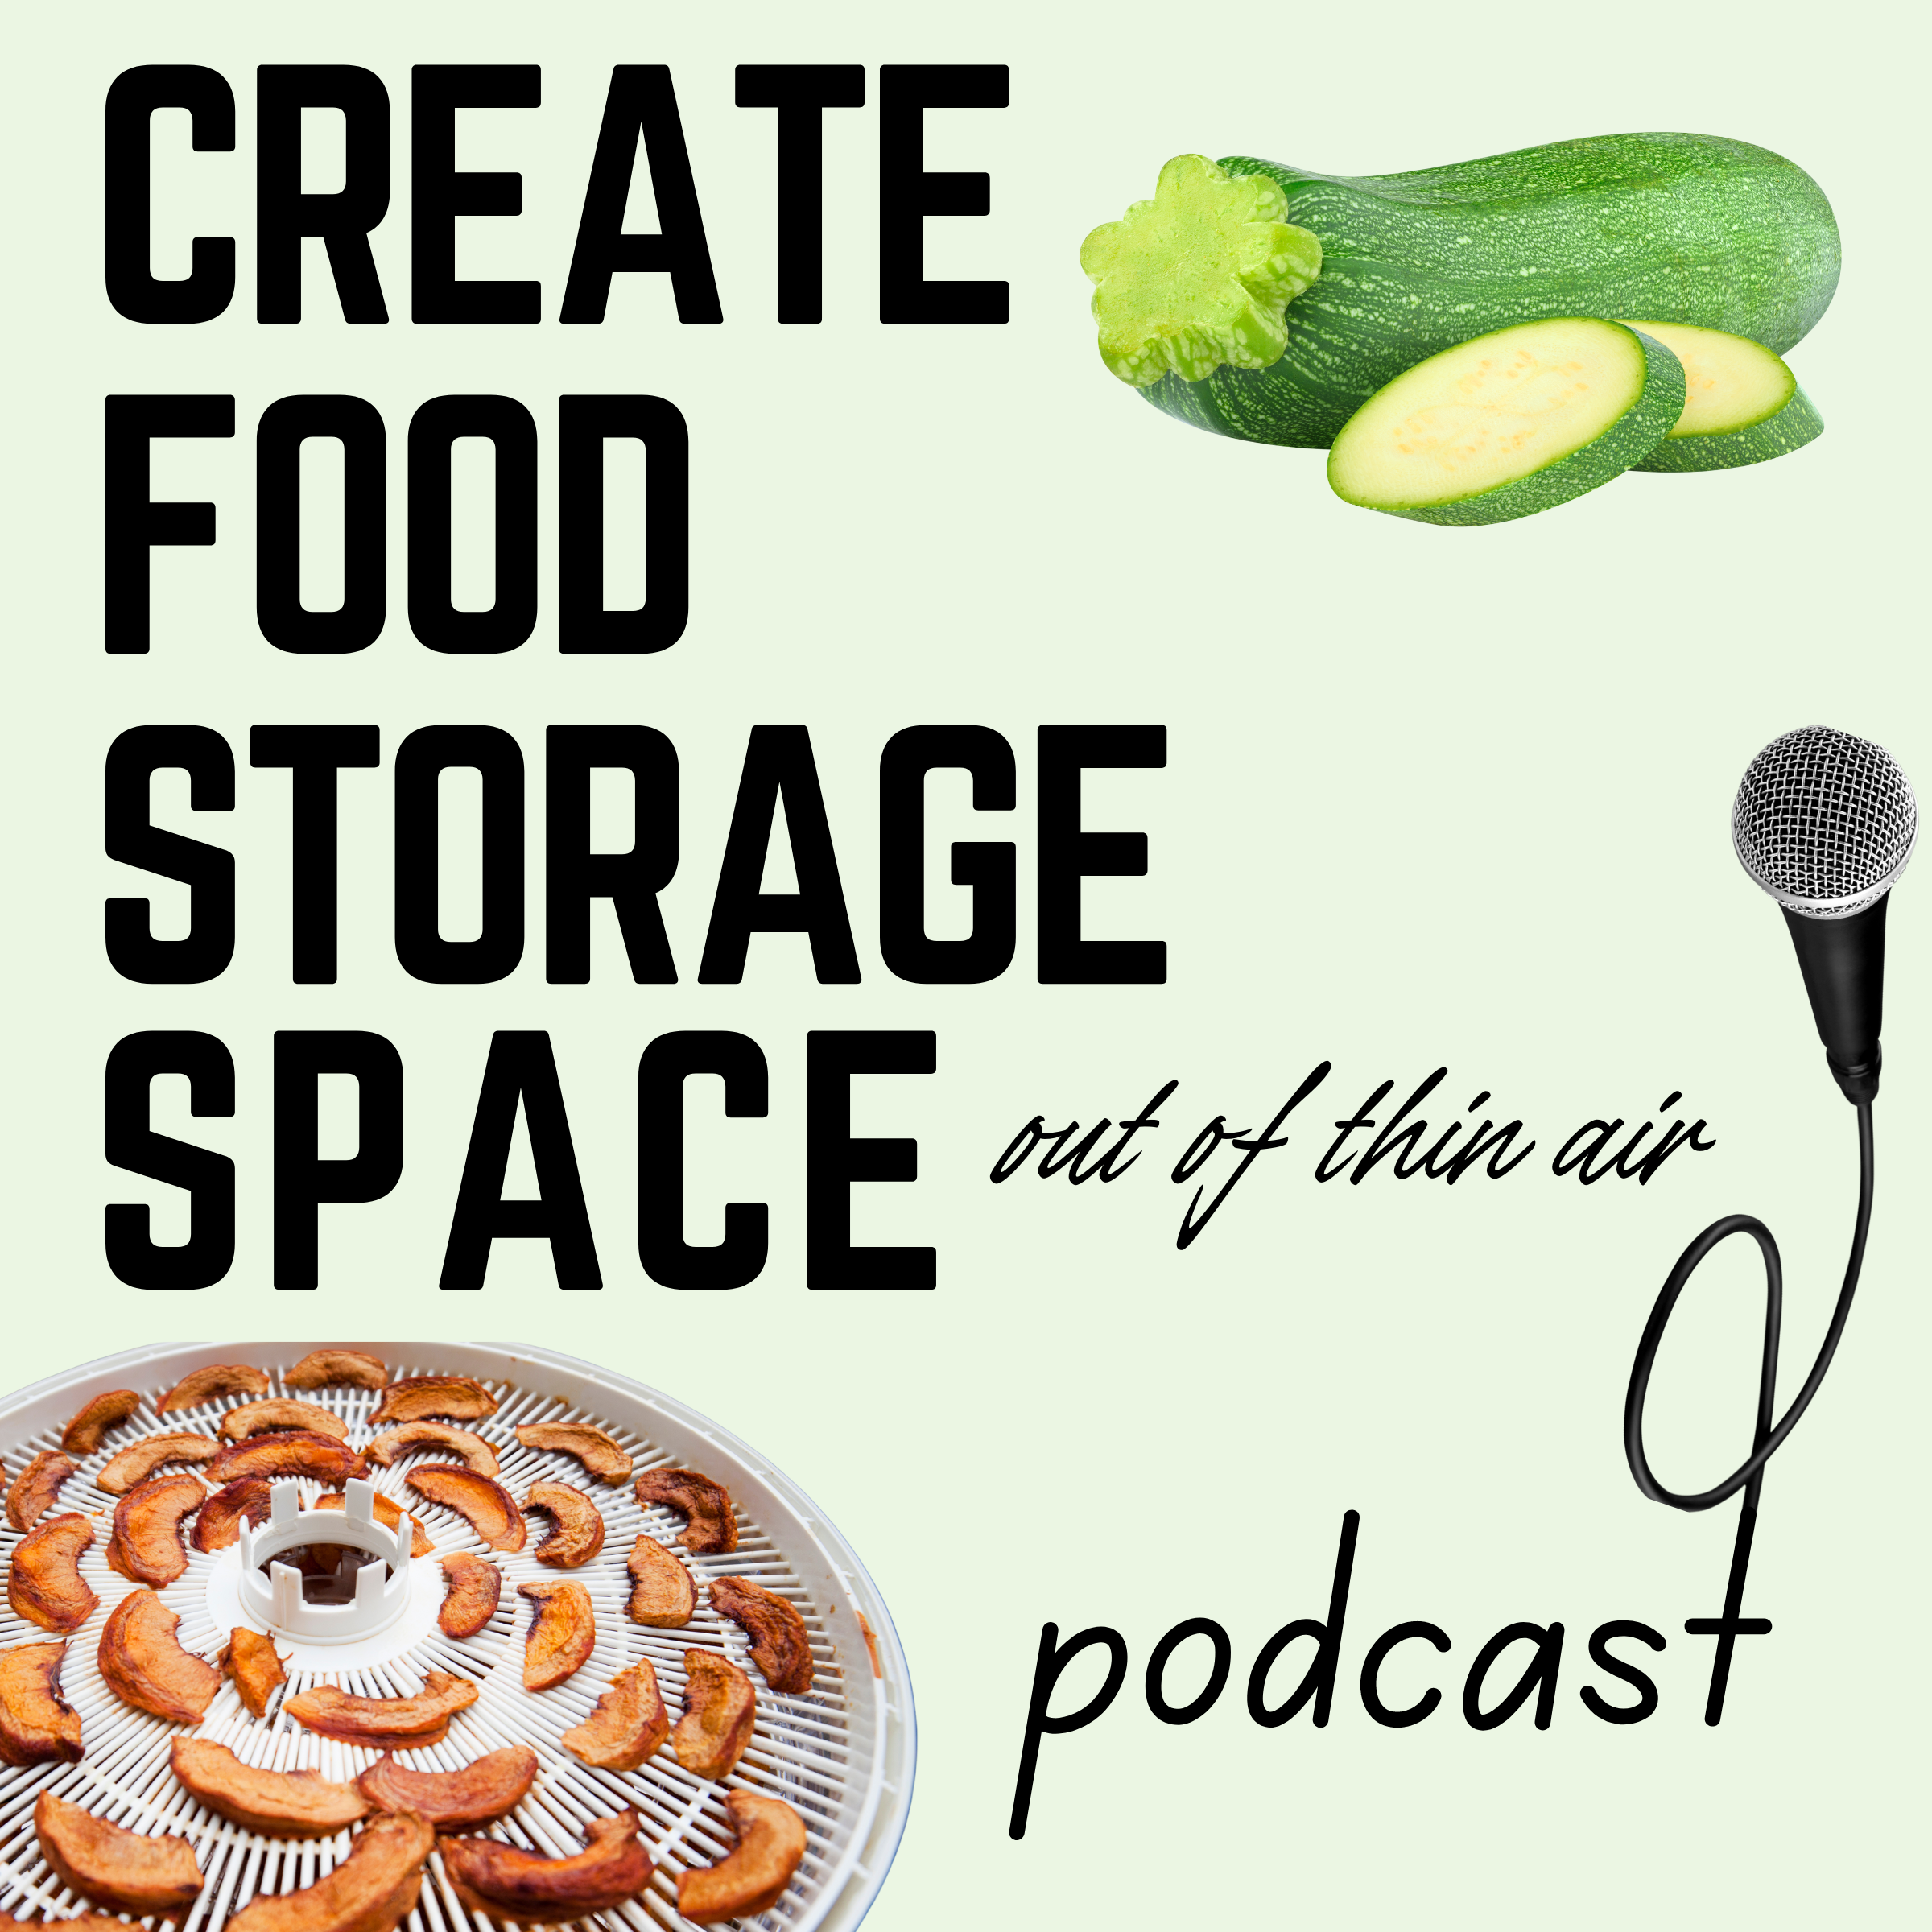 Create Food Storage Space out of Thin Air podcast episode 2